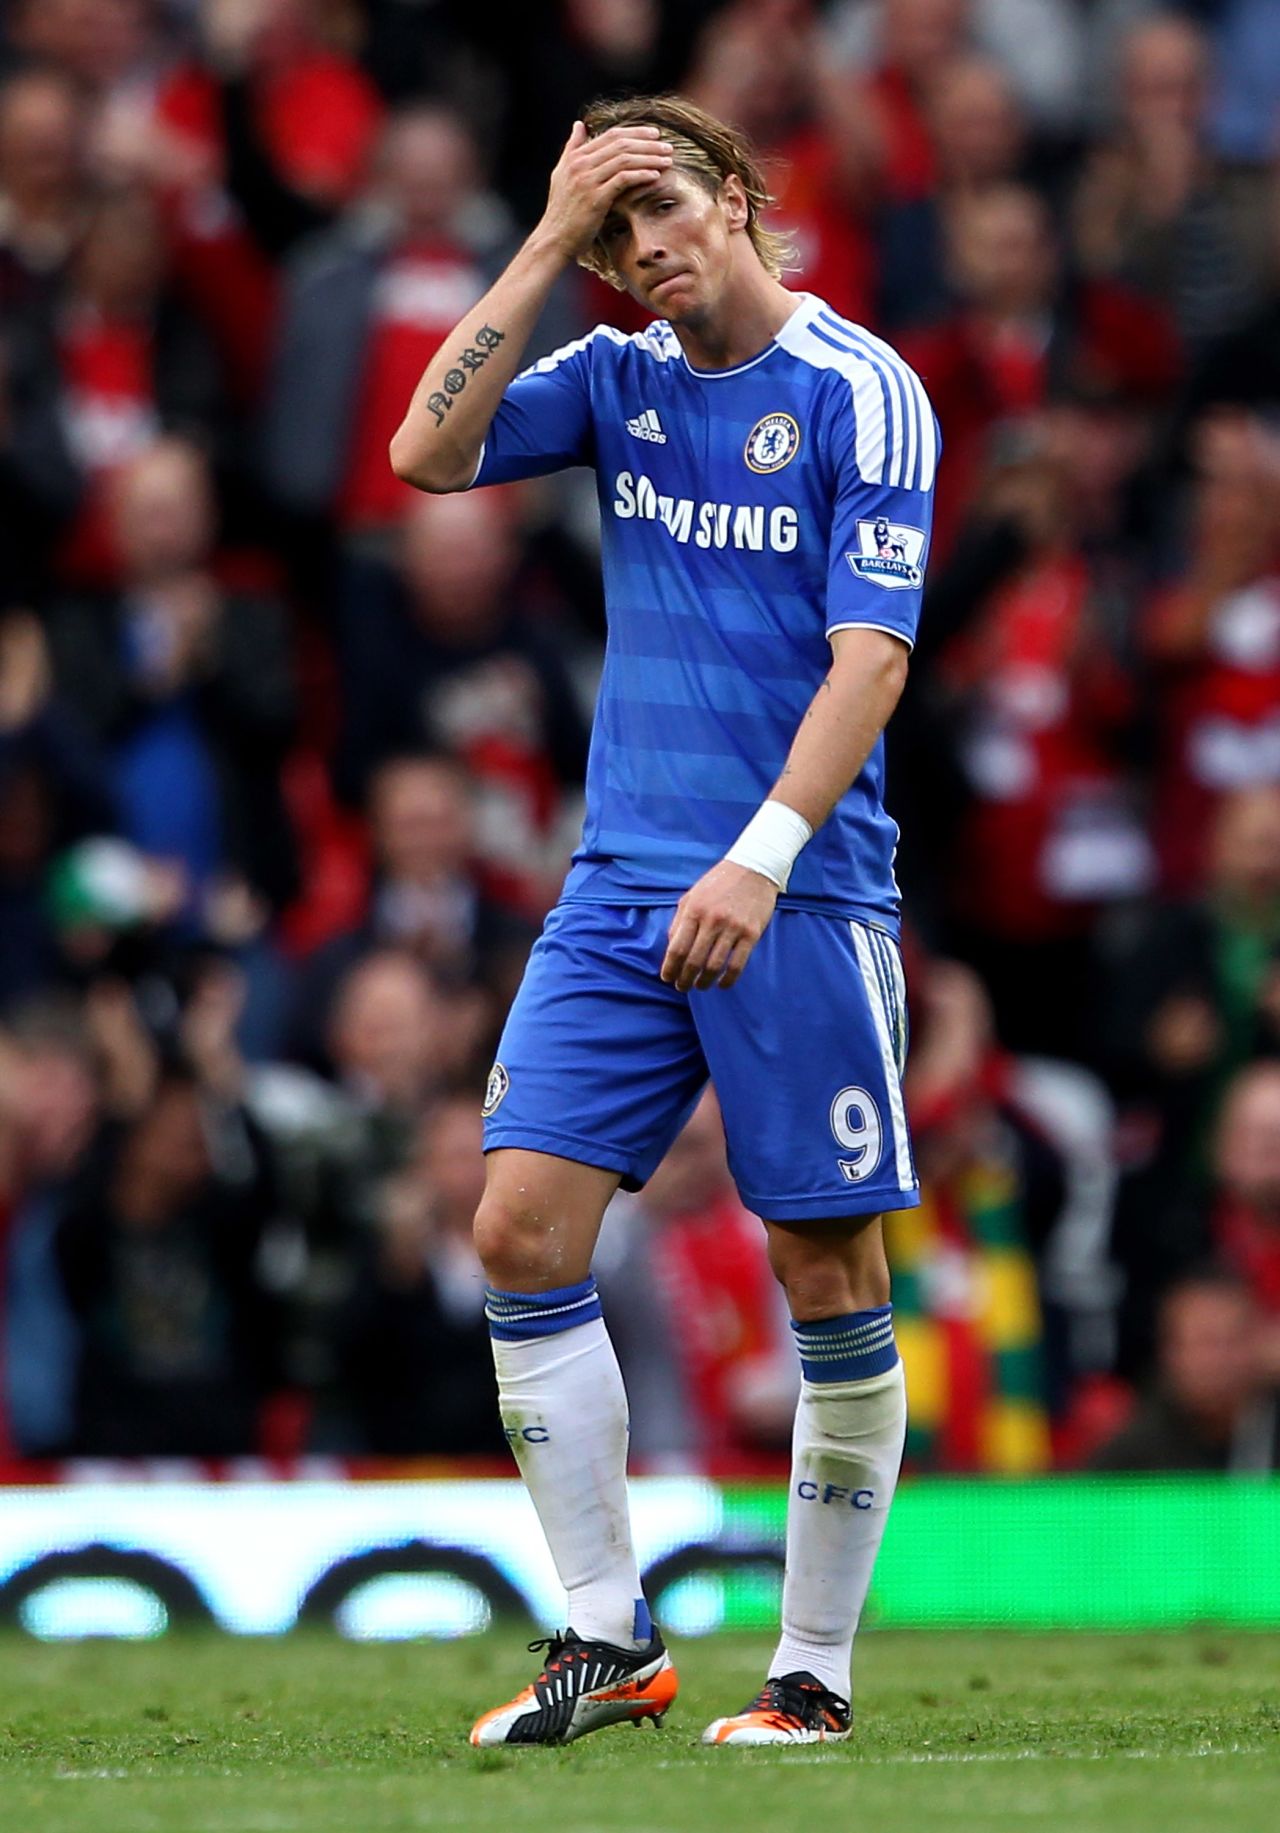 His first defeat as Chelsea manager arrived at Old Trafford, where Villas-Boas' team were beaten 3-1 by Manchester United in September. The match was best remebered for a horrible miss by Chelsea striker Fernando Torres, who fired wide from six-yards out with the goal gaping.